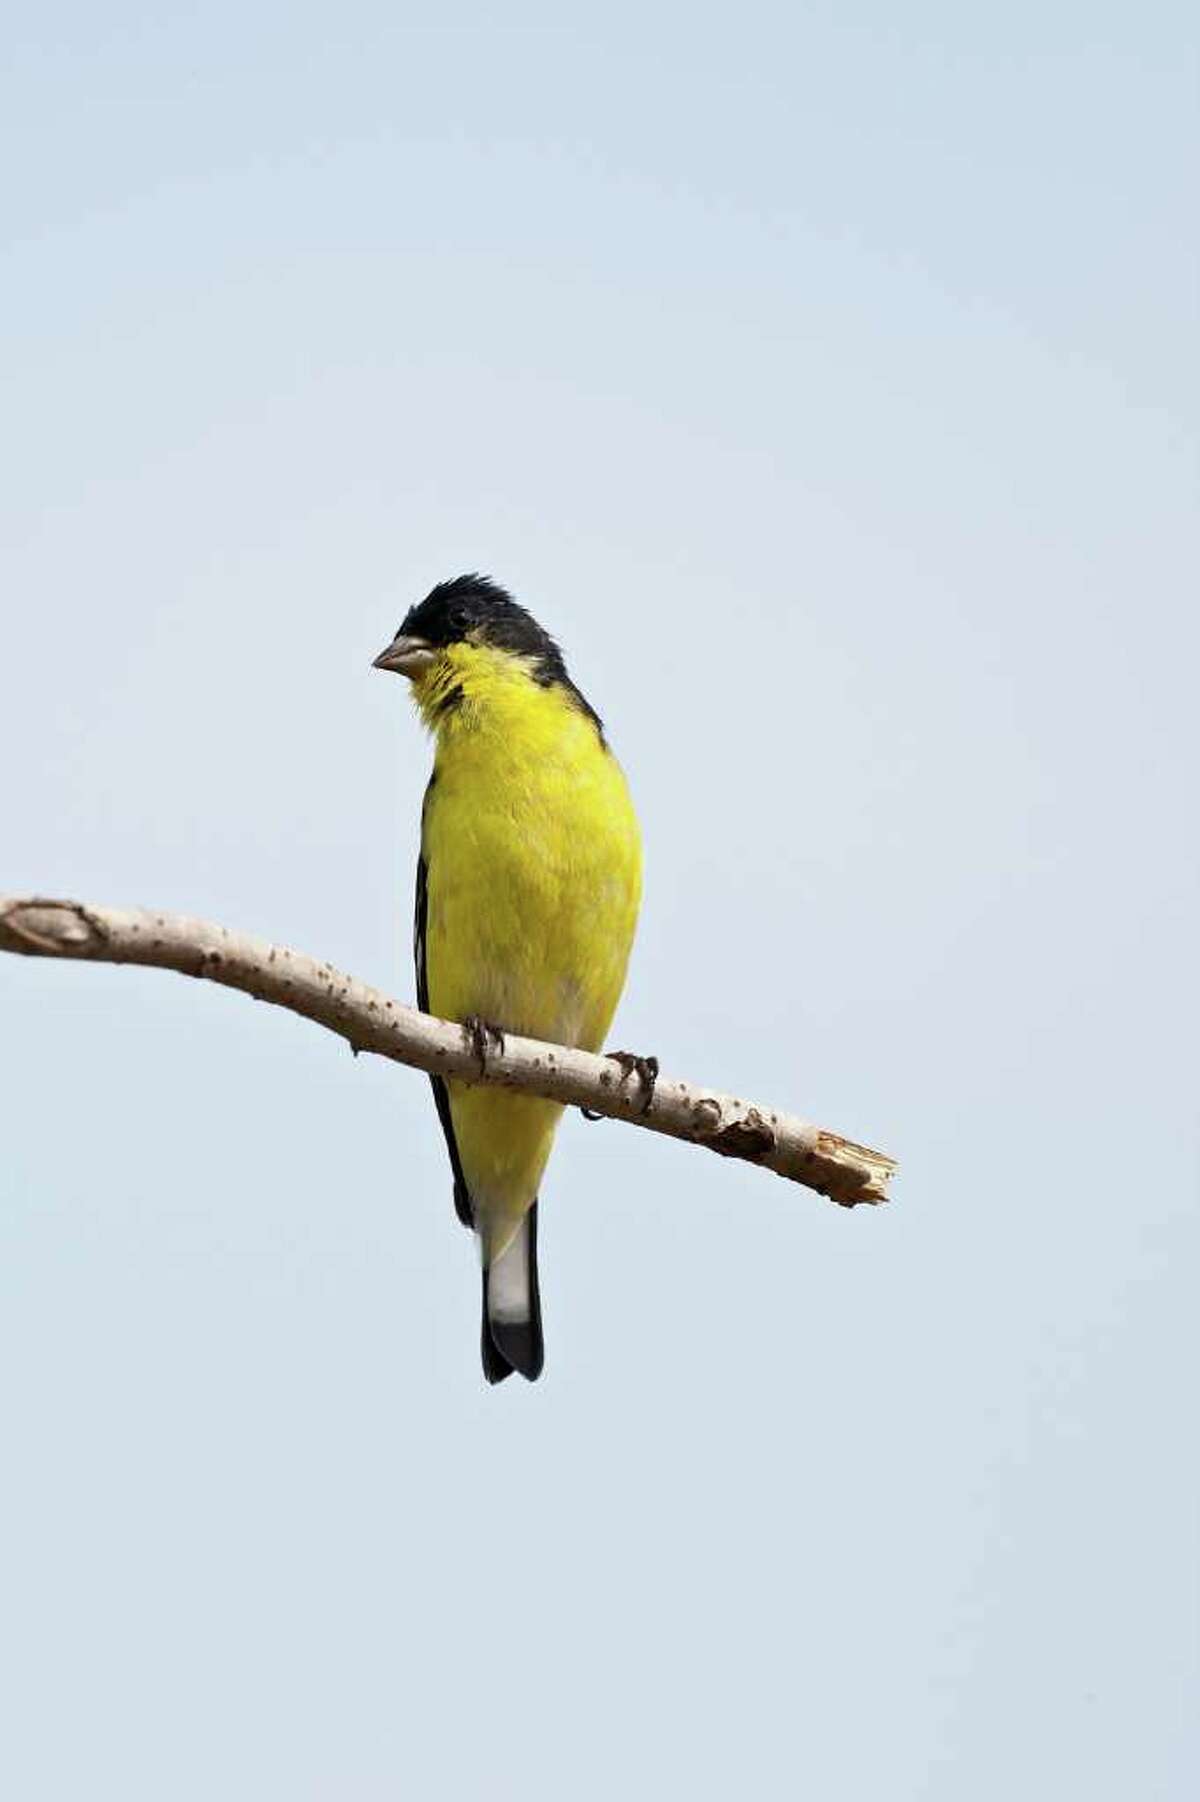 Male lesser goldfinch are colorful all year with rich black head and back and bright yellow undersides. Photo Credit: Kathy Adams Clark. Restricted use.